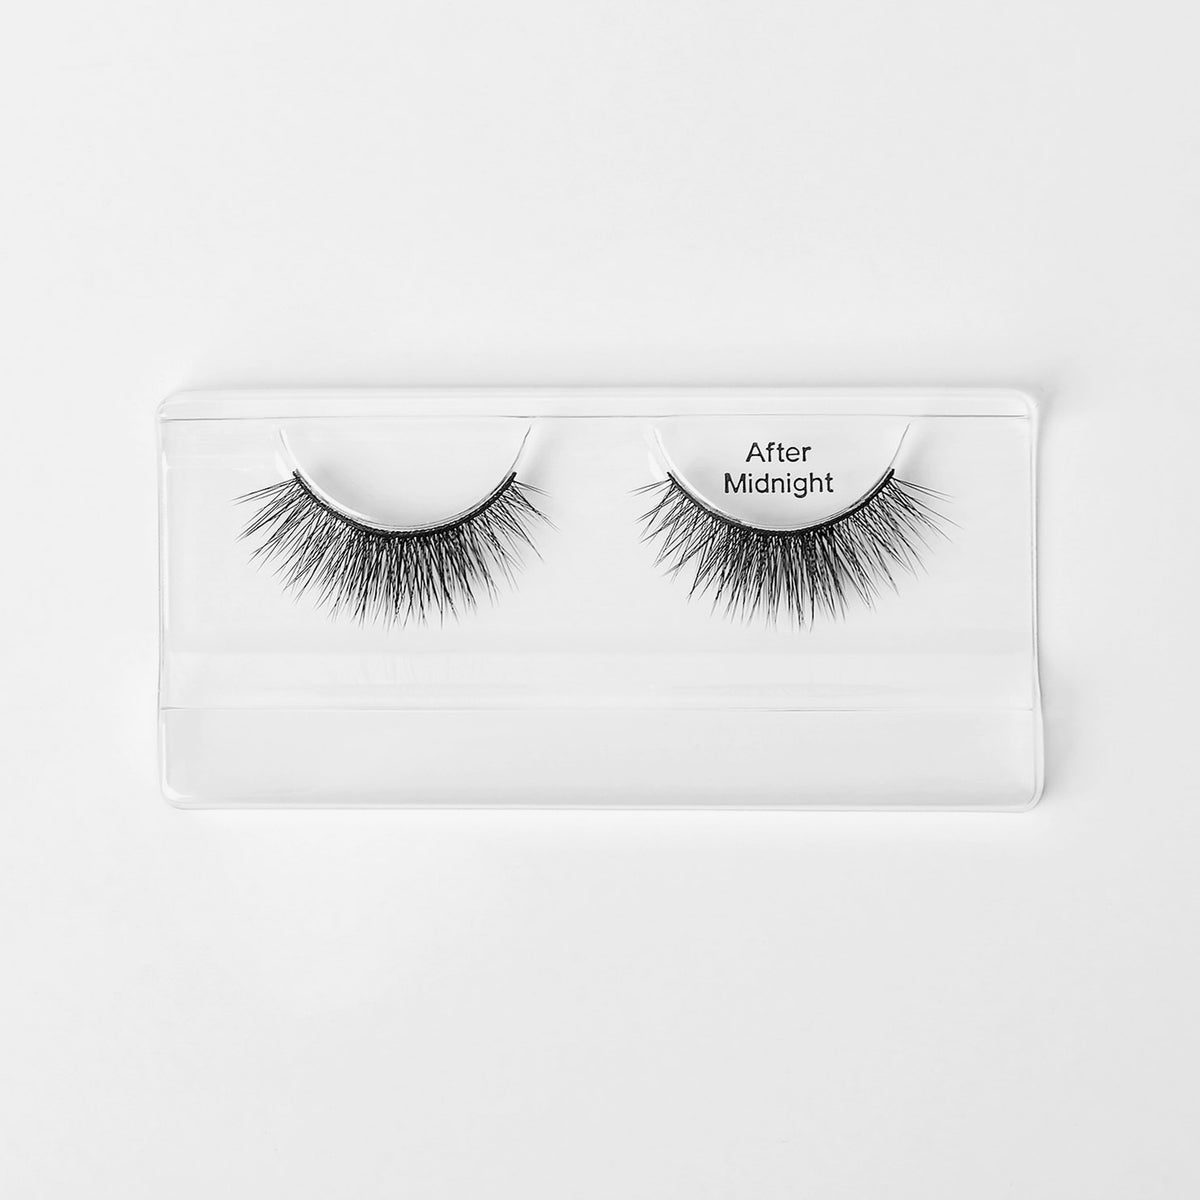 BH Cosmetics | 1991 by Alycia Marie False Lashes After Midnight